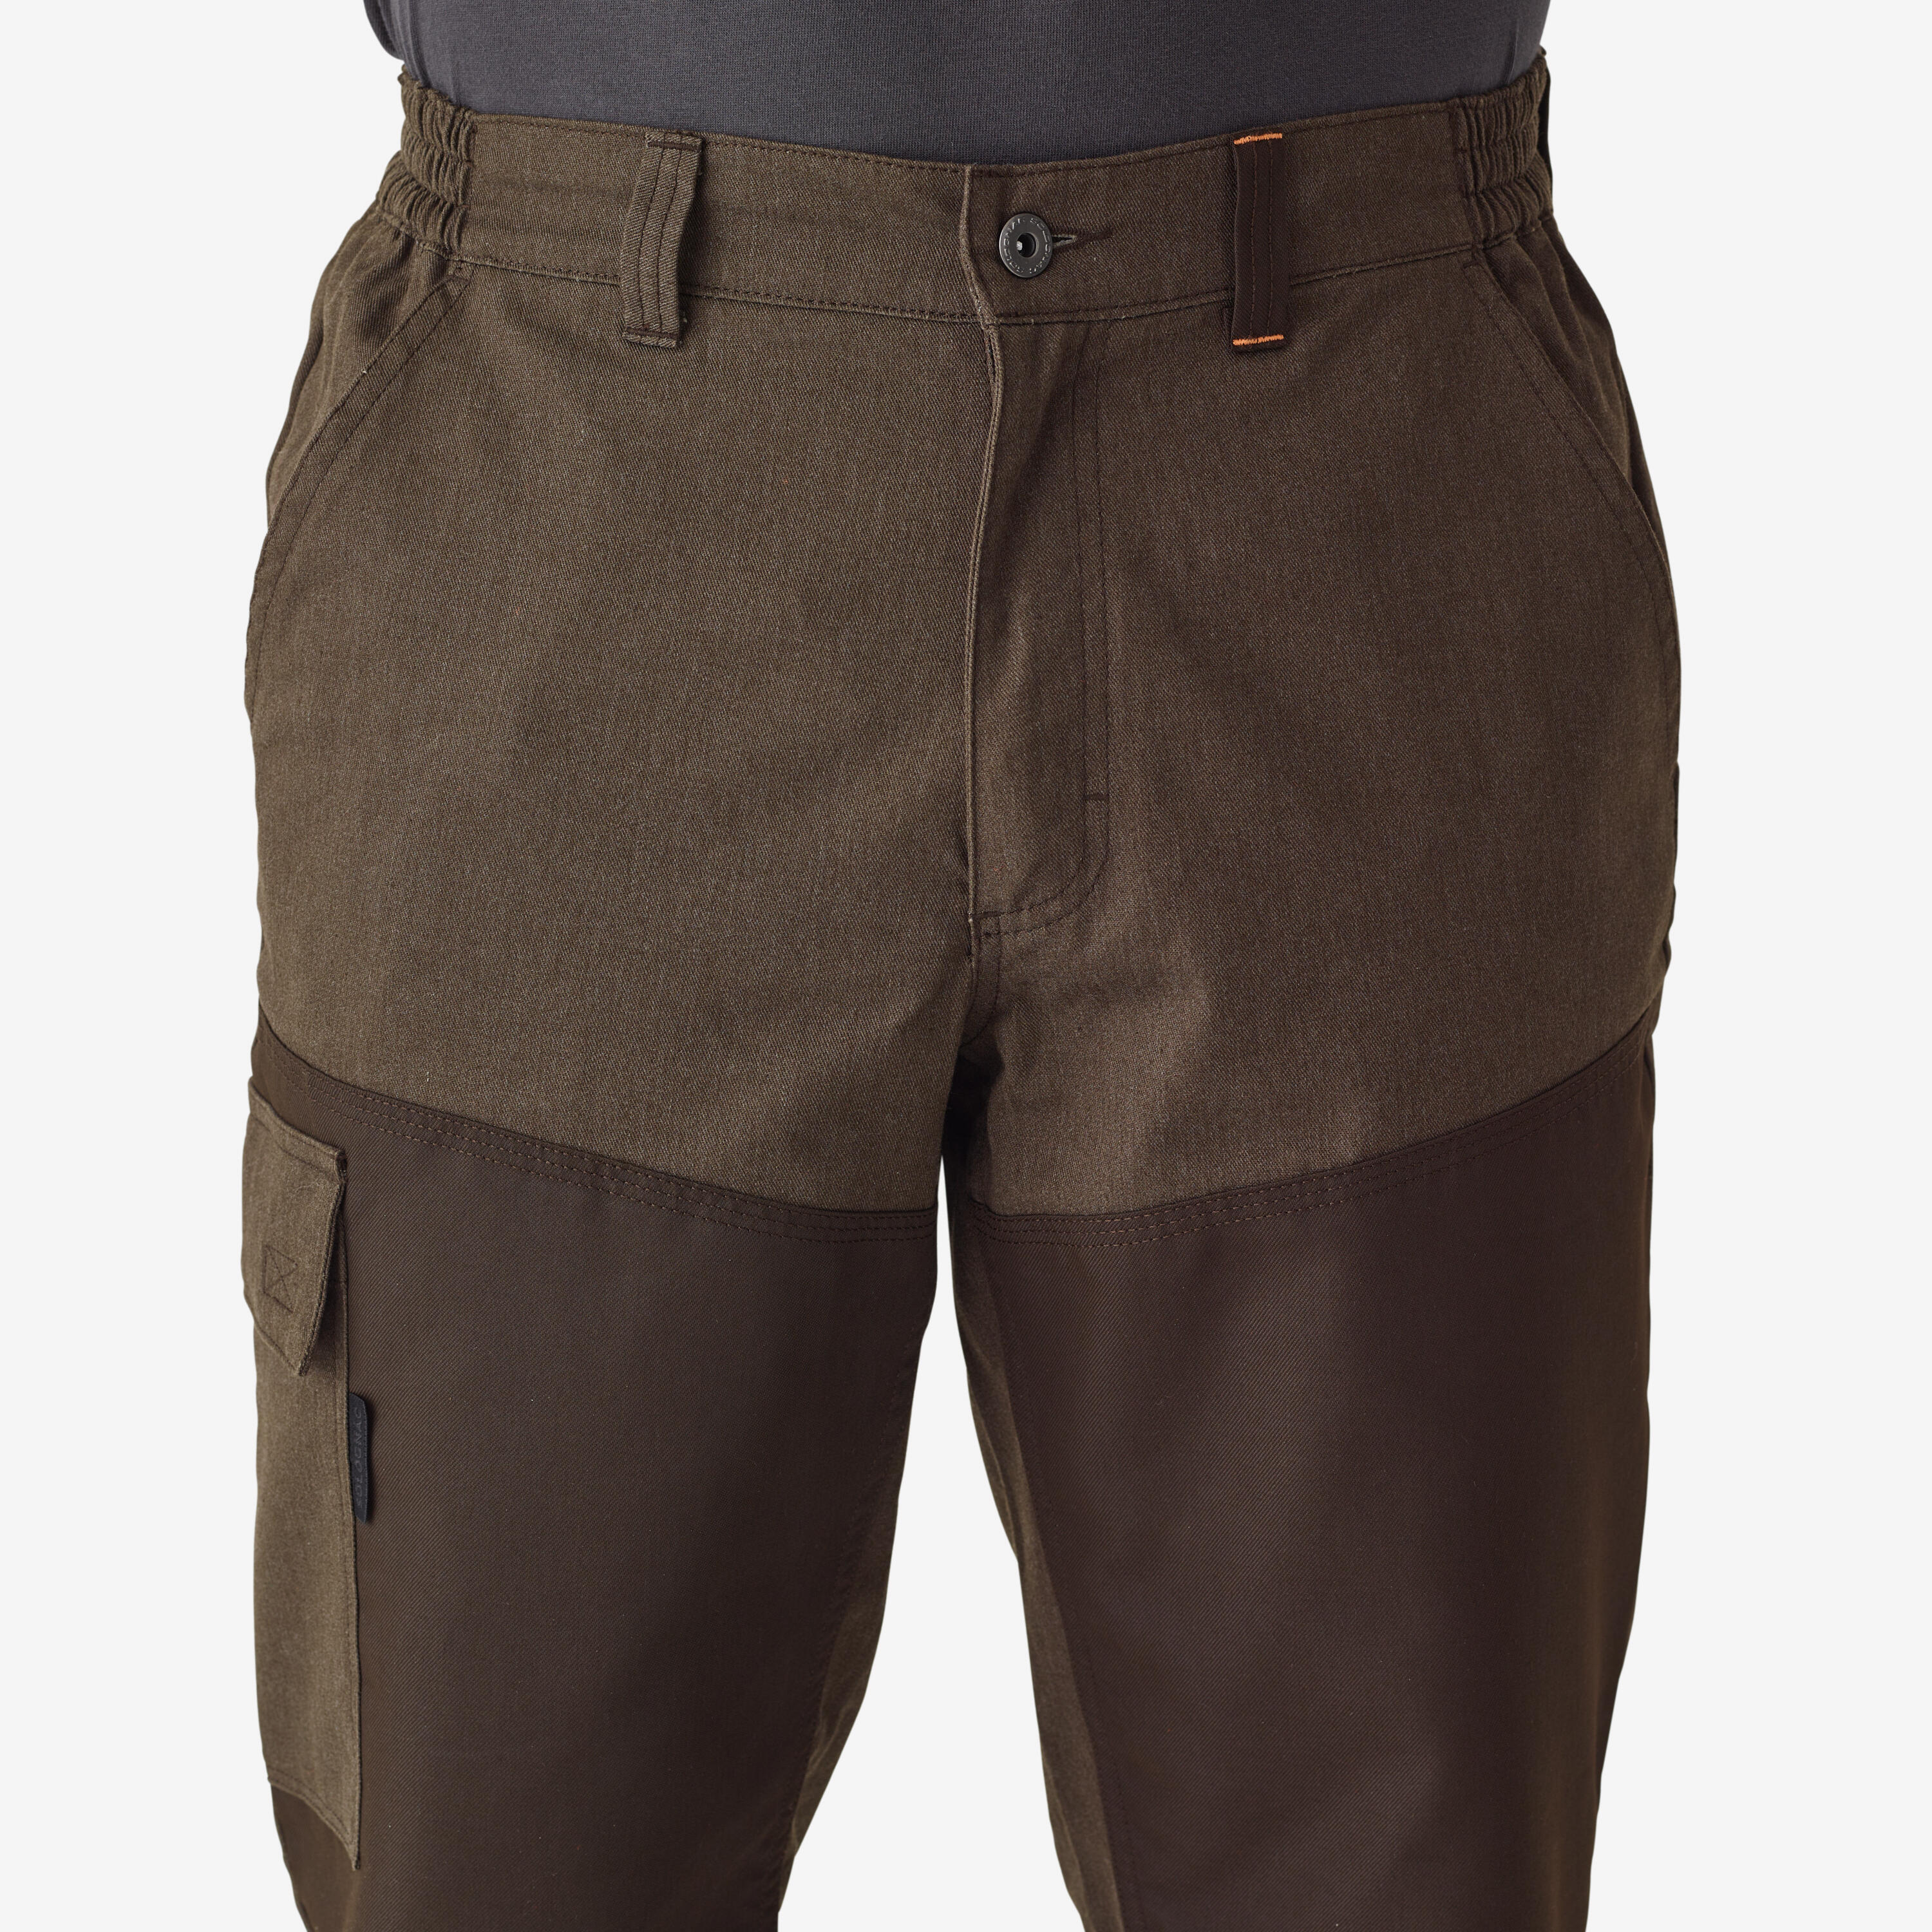 TAPERED HUNTING TROUSERS RENFORT 100 - BROWN 6/8